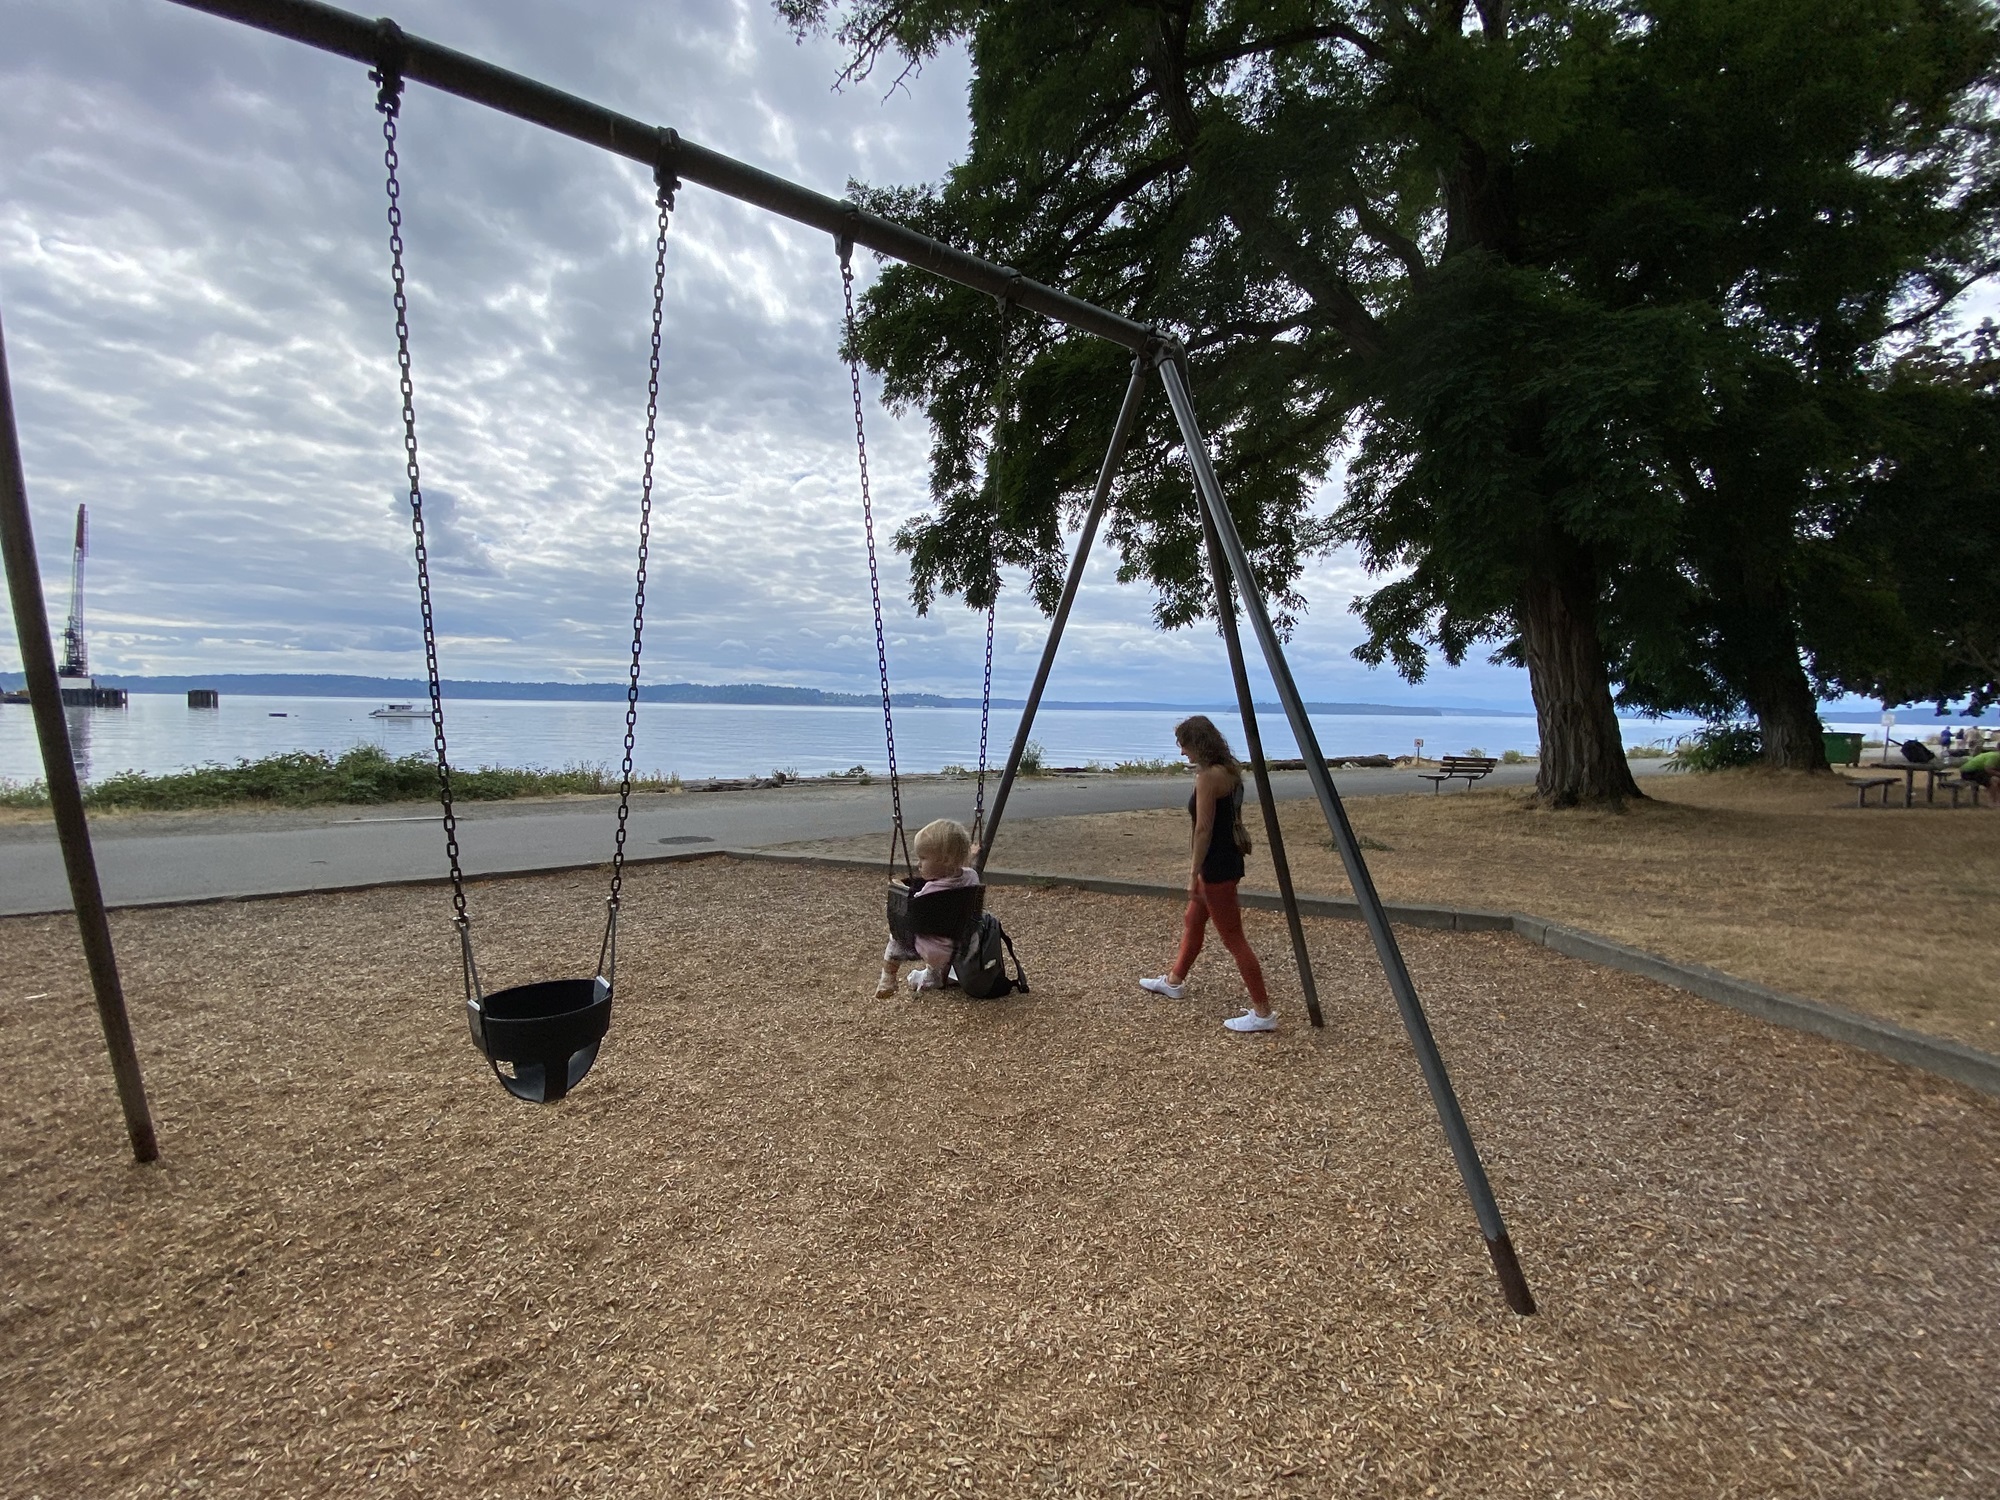 lincoln park in west seattle is the perfect activity for kids